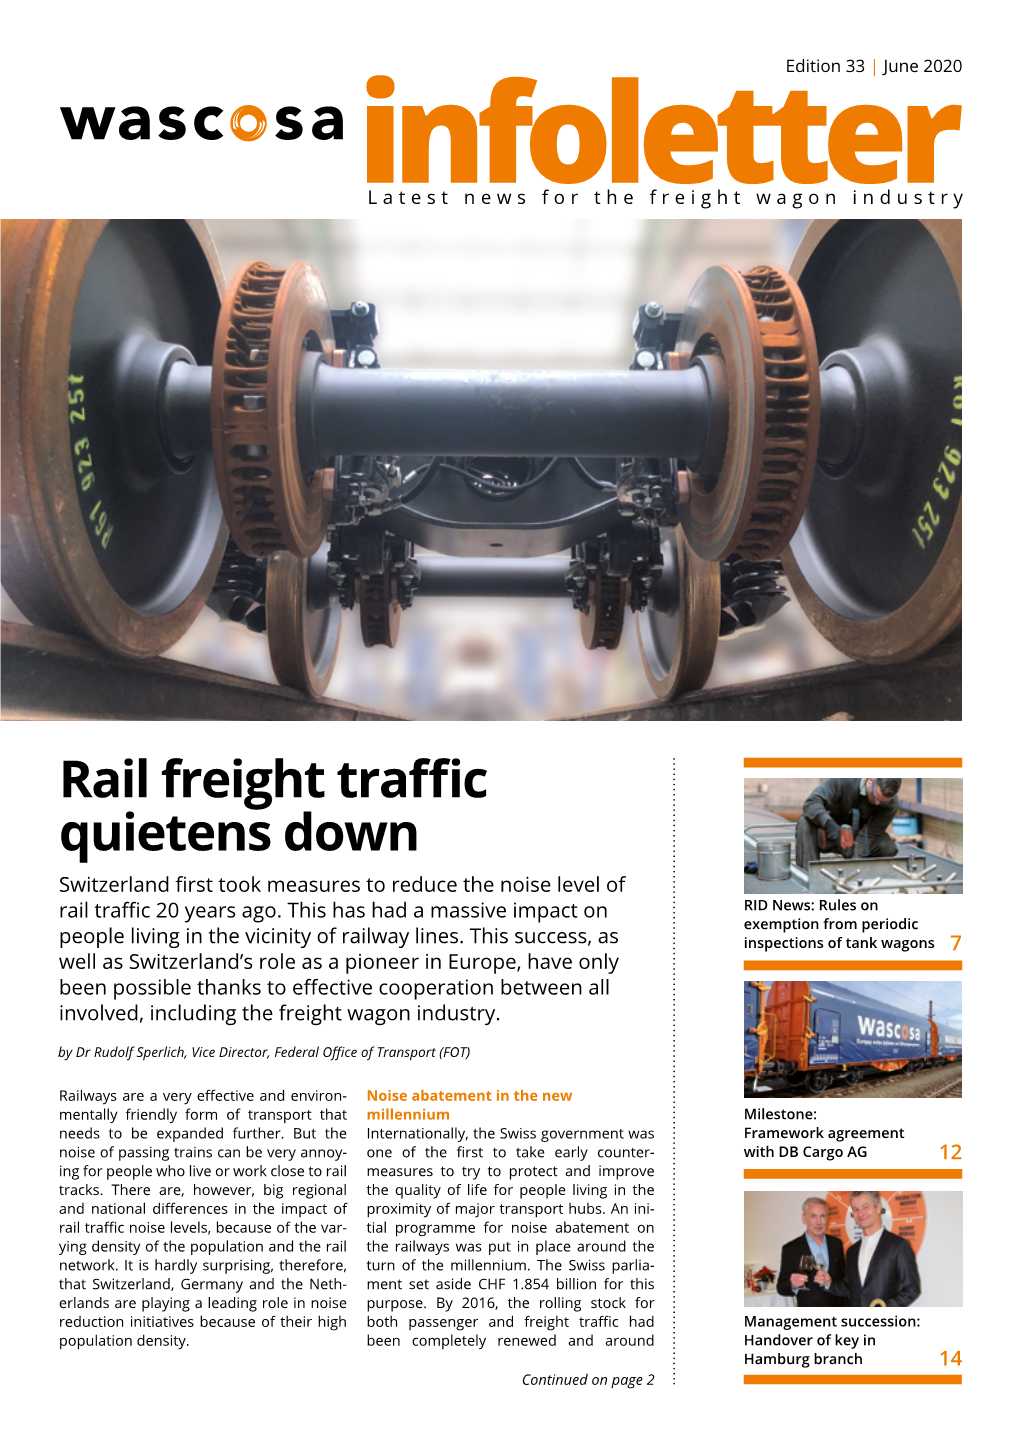 Rail Freight Traffic Quietens Down Switzerland First Took Measures to Reduce the Noise Level of Rail Traffic 20 Years Ago